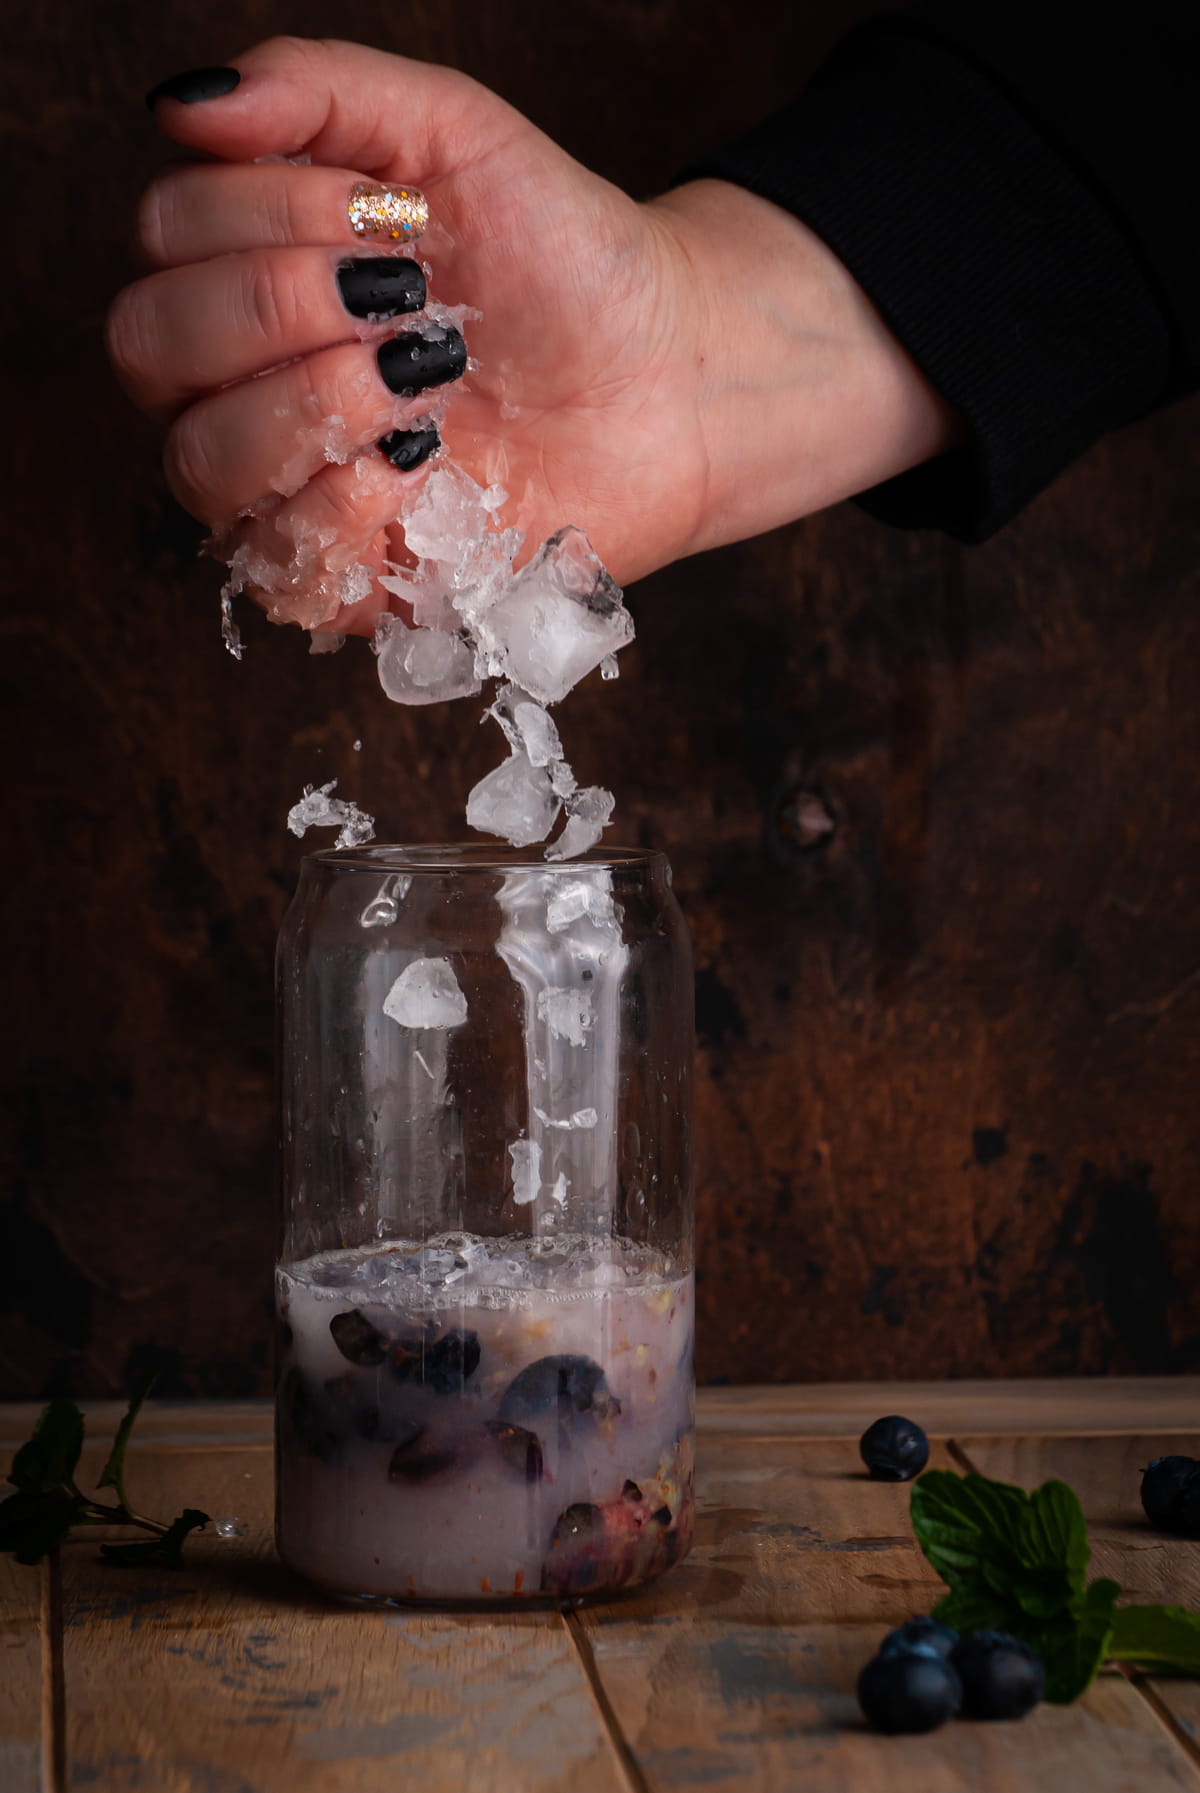 crushed ice being added to a glass with muddled blueberries